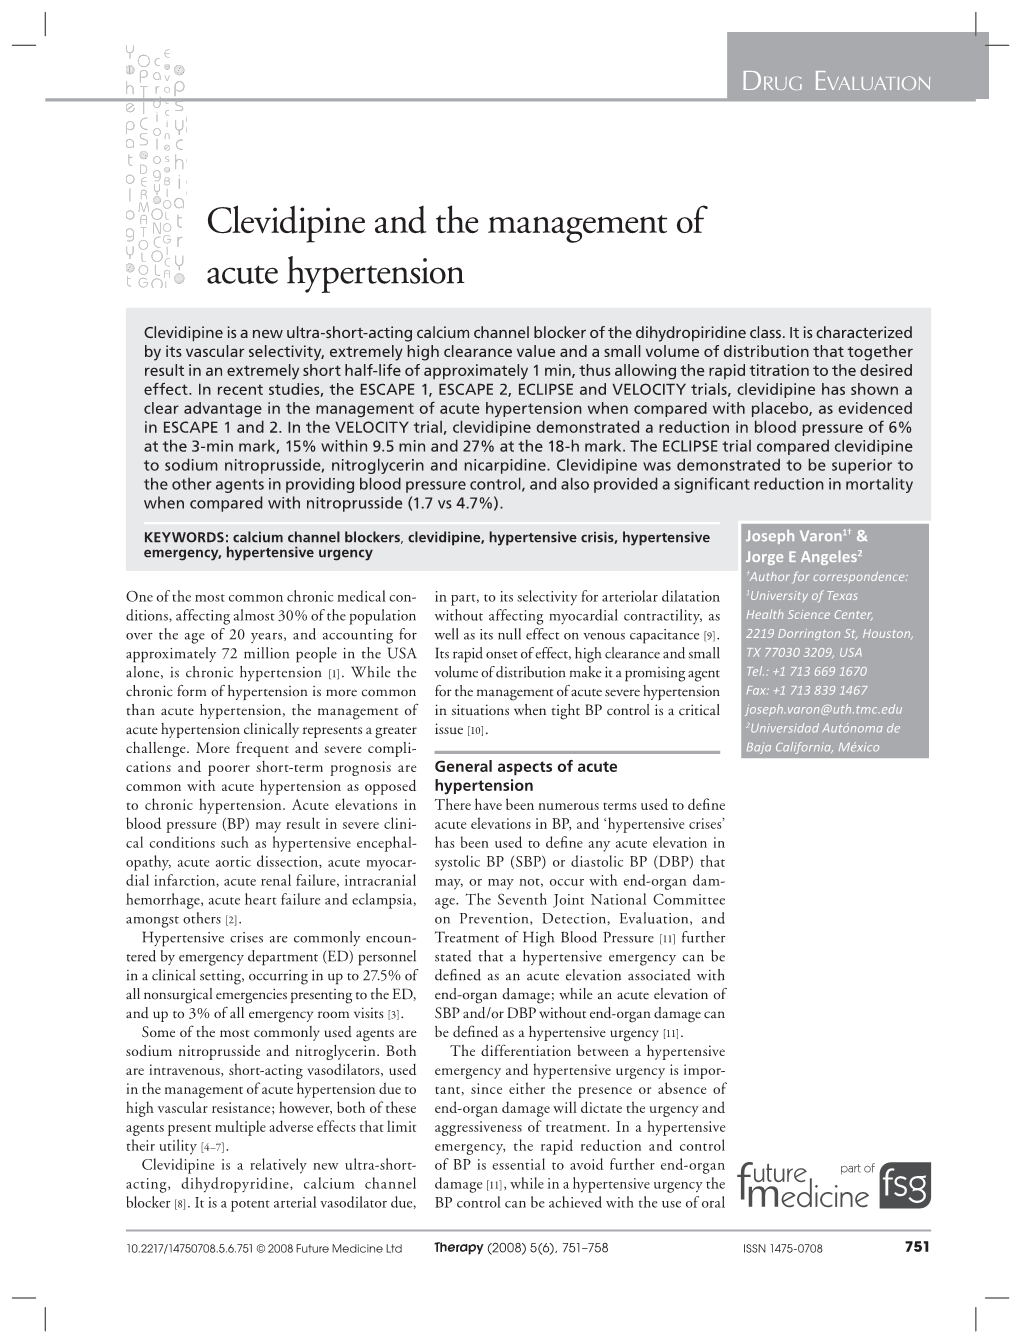 Clevidipine and the Management of Acute Hypertension